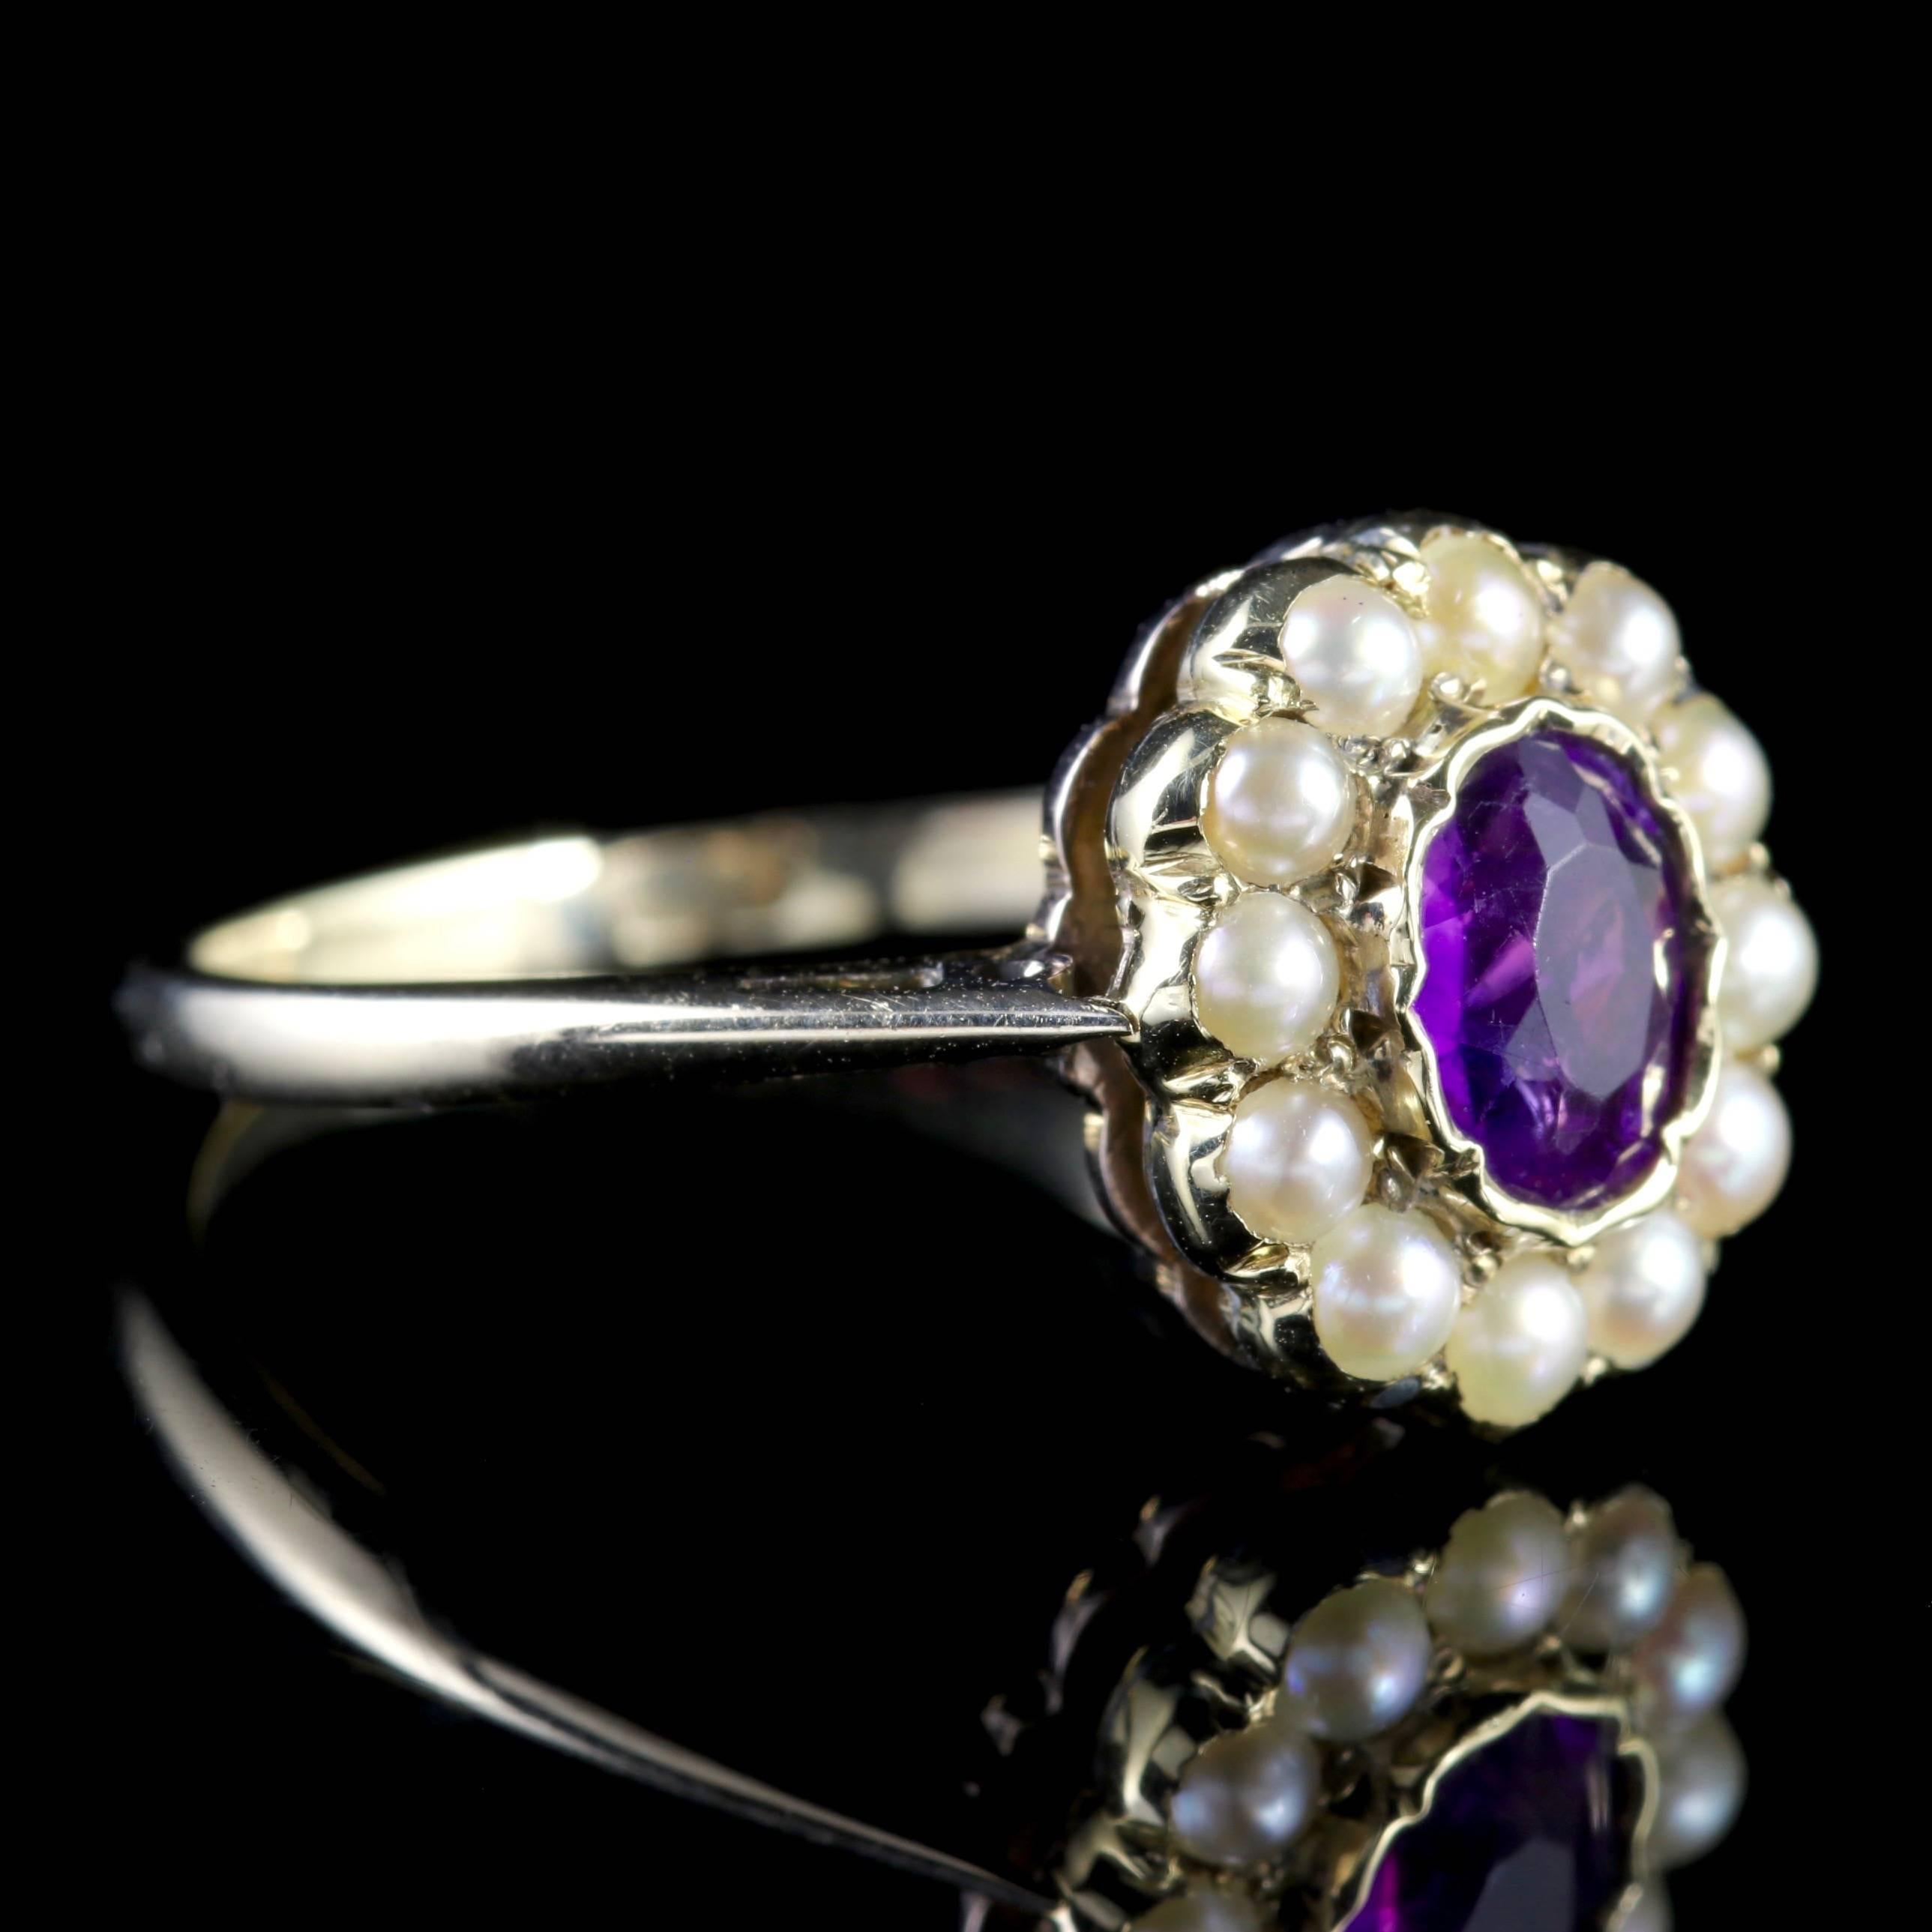 Women's Antique Victorian Amethyst Pearl Cluster Ring 18ct Gold, circa 1900